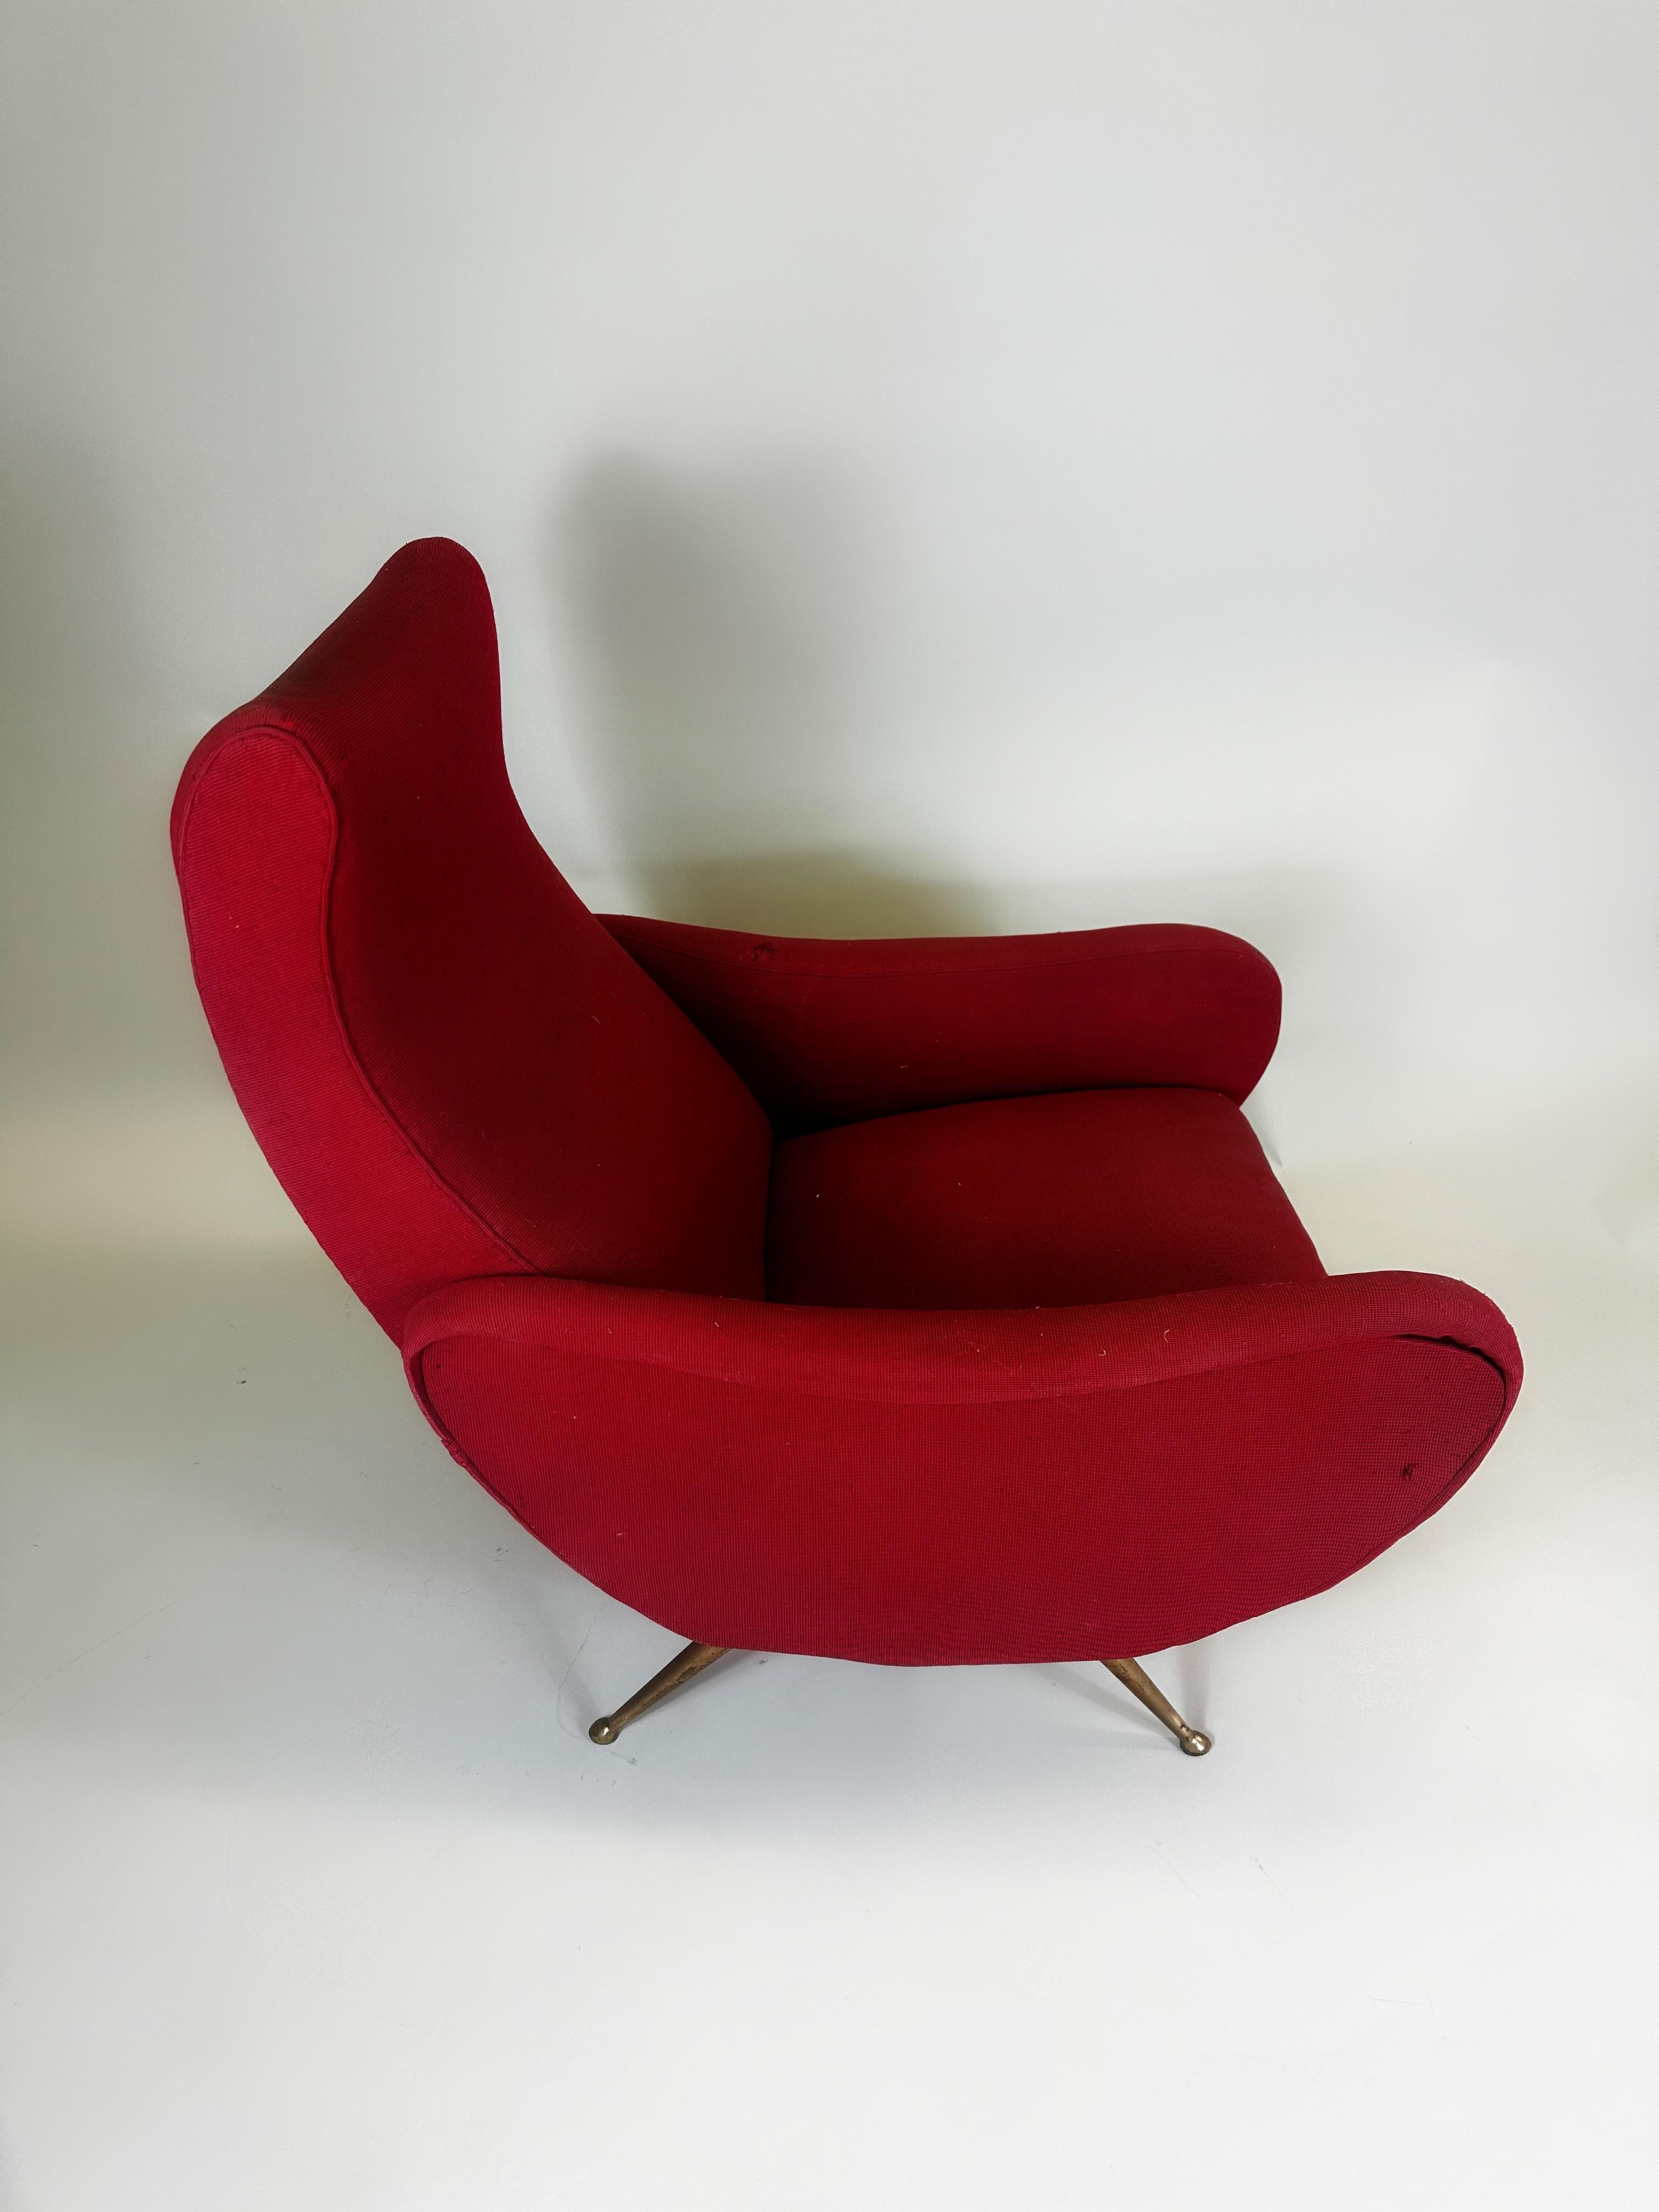 Hand-Crafted Pair of Italian Mid-Century Modern Lounge Lady Chairs in Style of Marco Zanuso For Sale